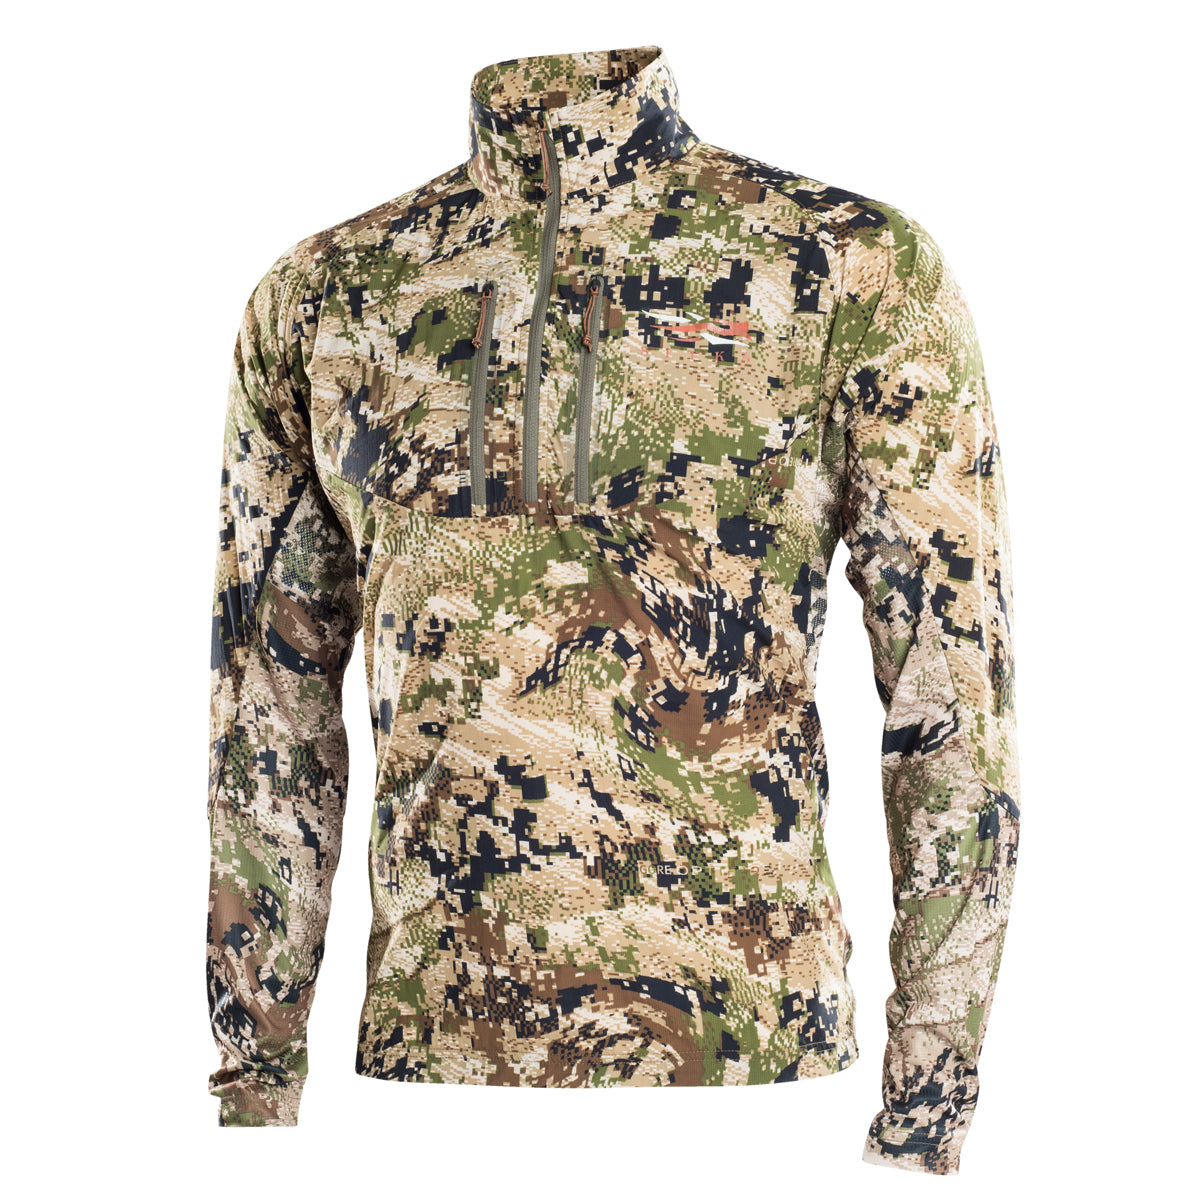 Sitka Ascent Shirt in Sitka Ascent Shirt by Sitka | Apparel - goHUNT Shop by GOHUNT | Sitka - GOHUNT Shop